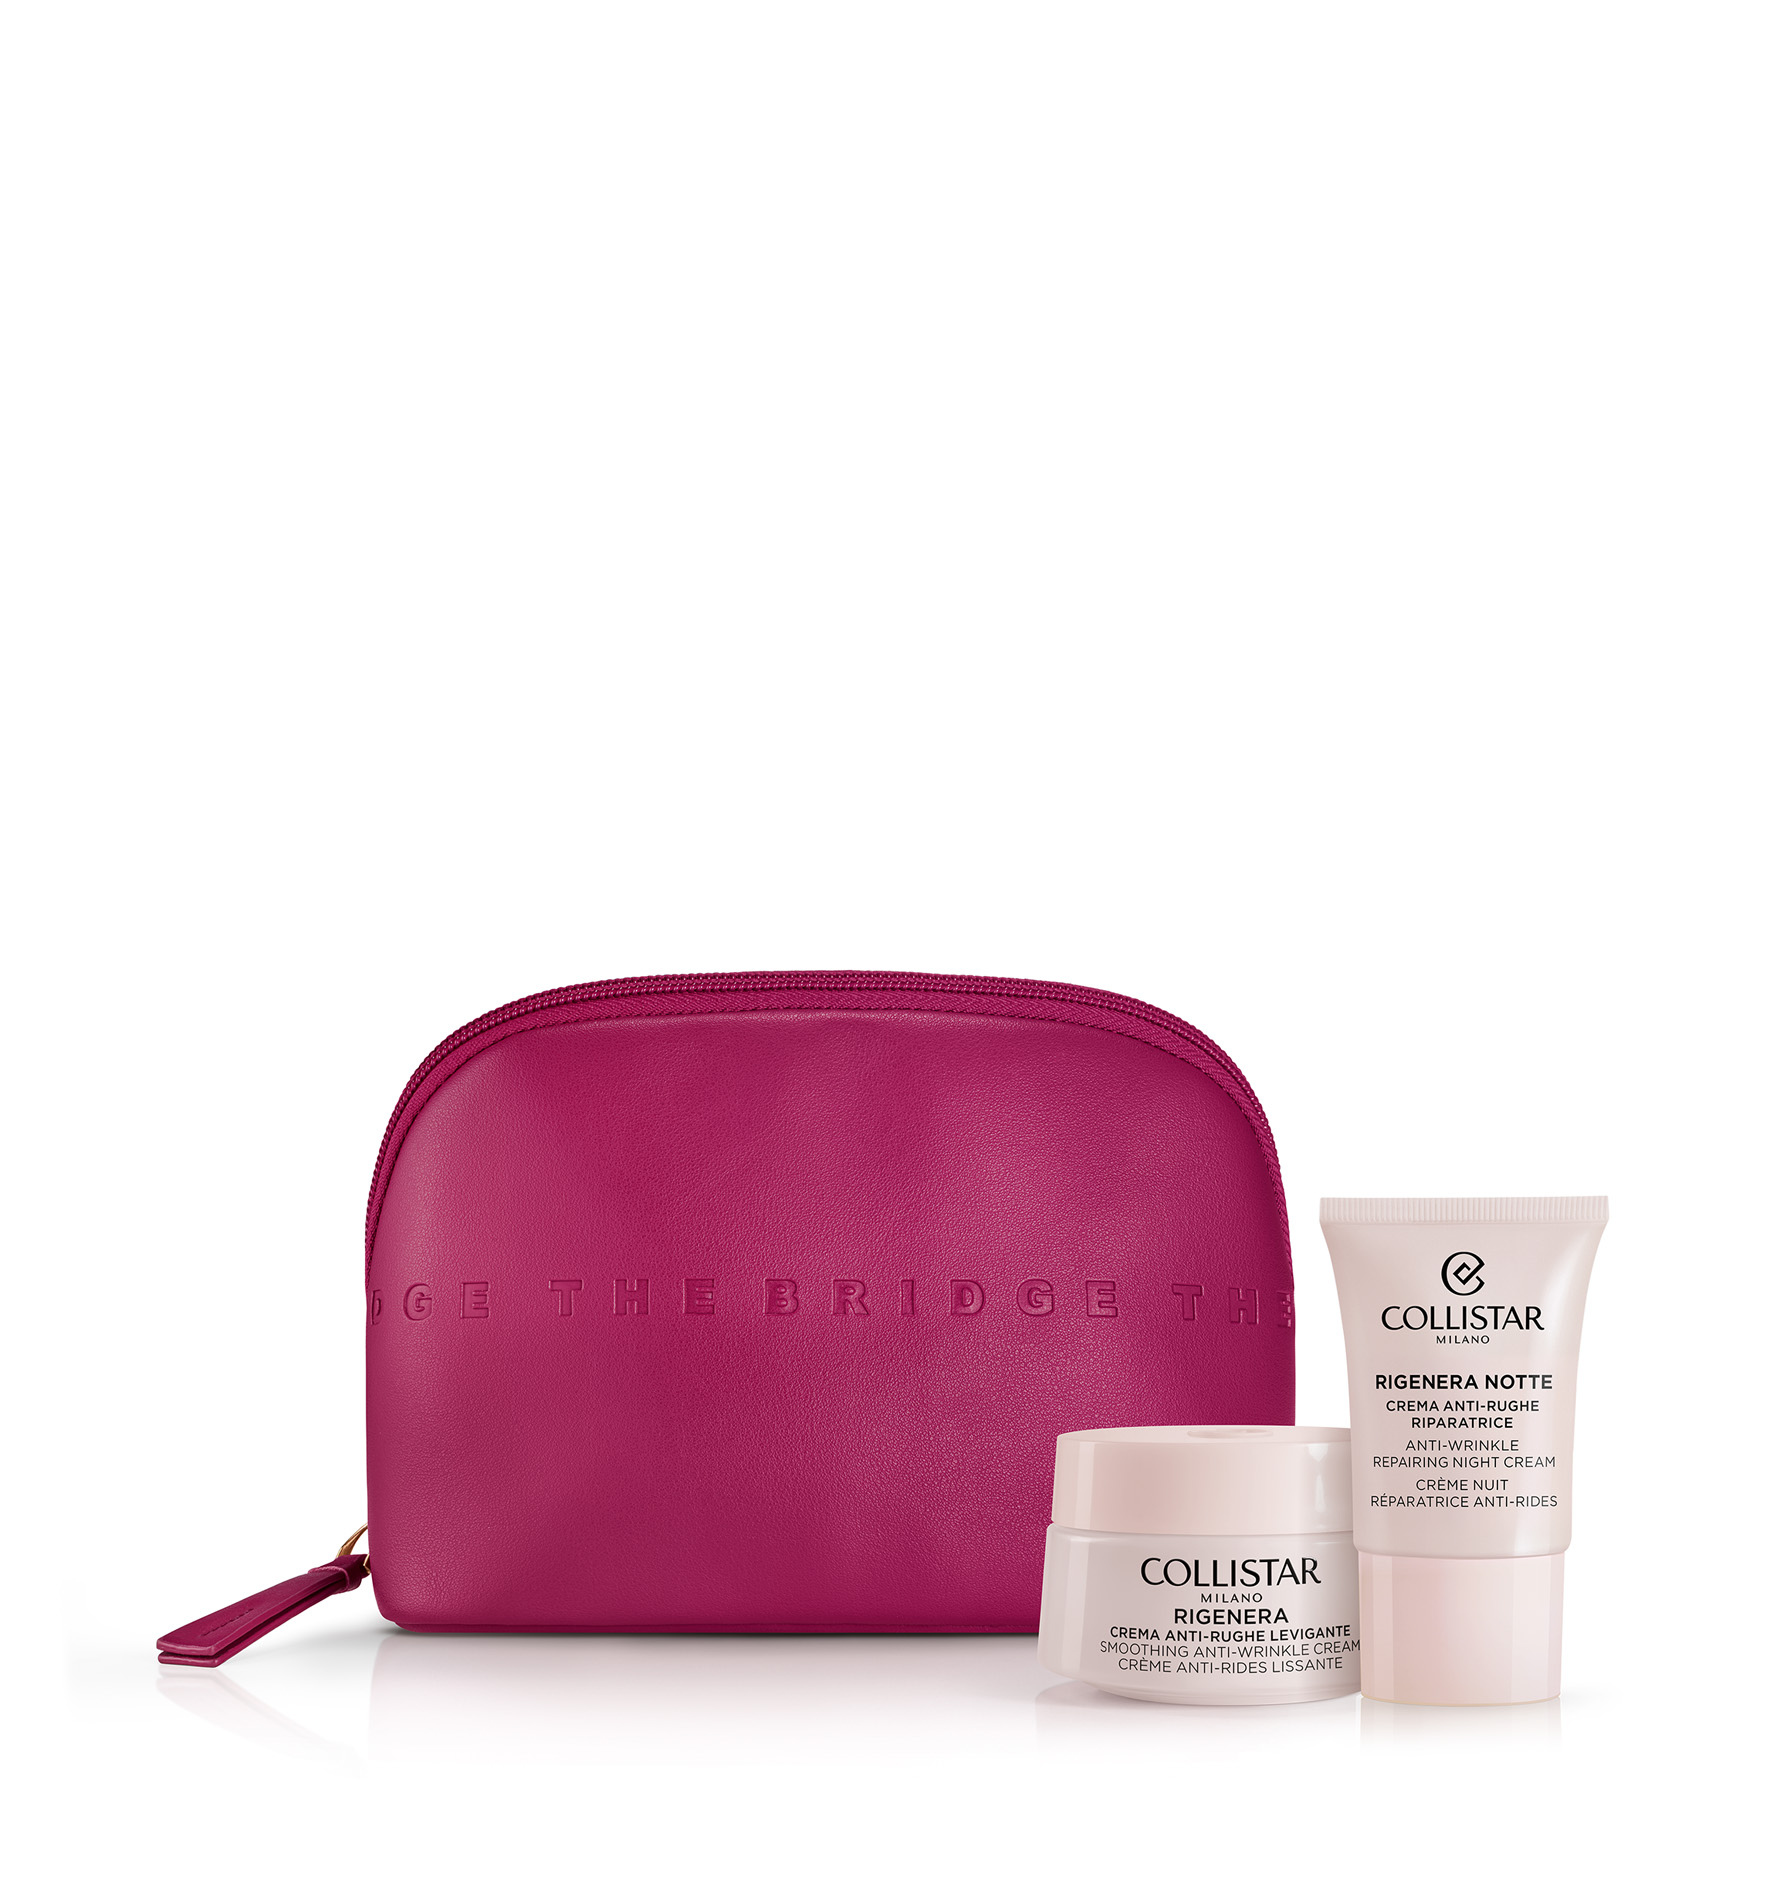 RIGENERA SMOOTHING ANTI-WRINKLE CREAM FACE AND NECK GIFT SET - Nieuw | Collistar - Shop Online Ufficiale